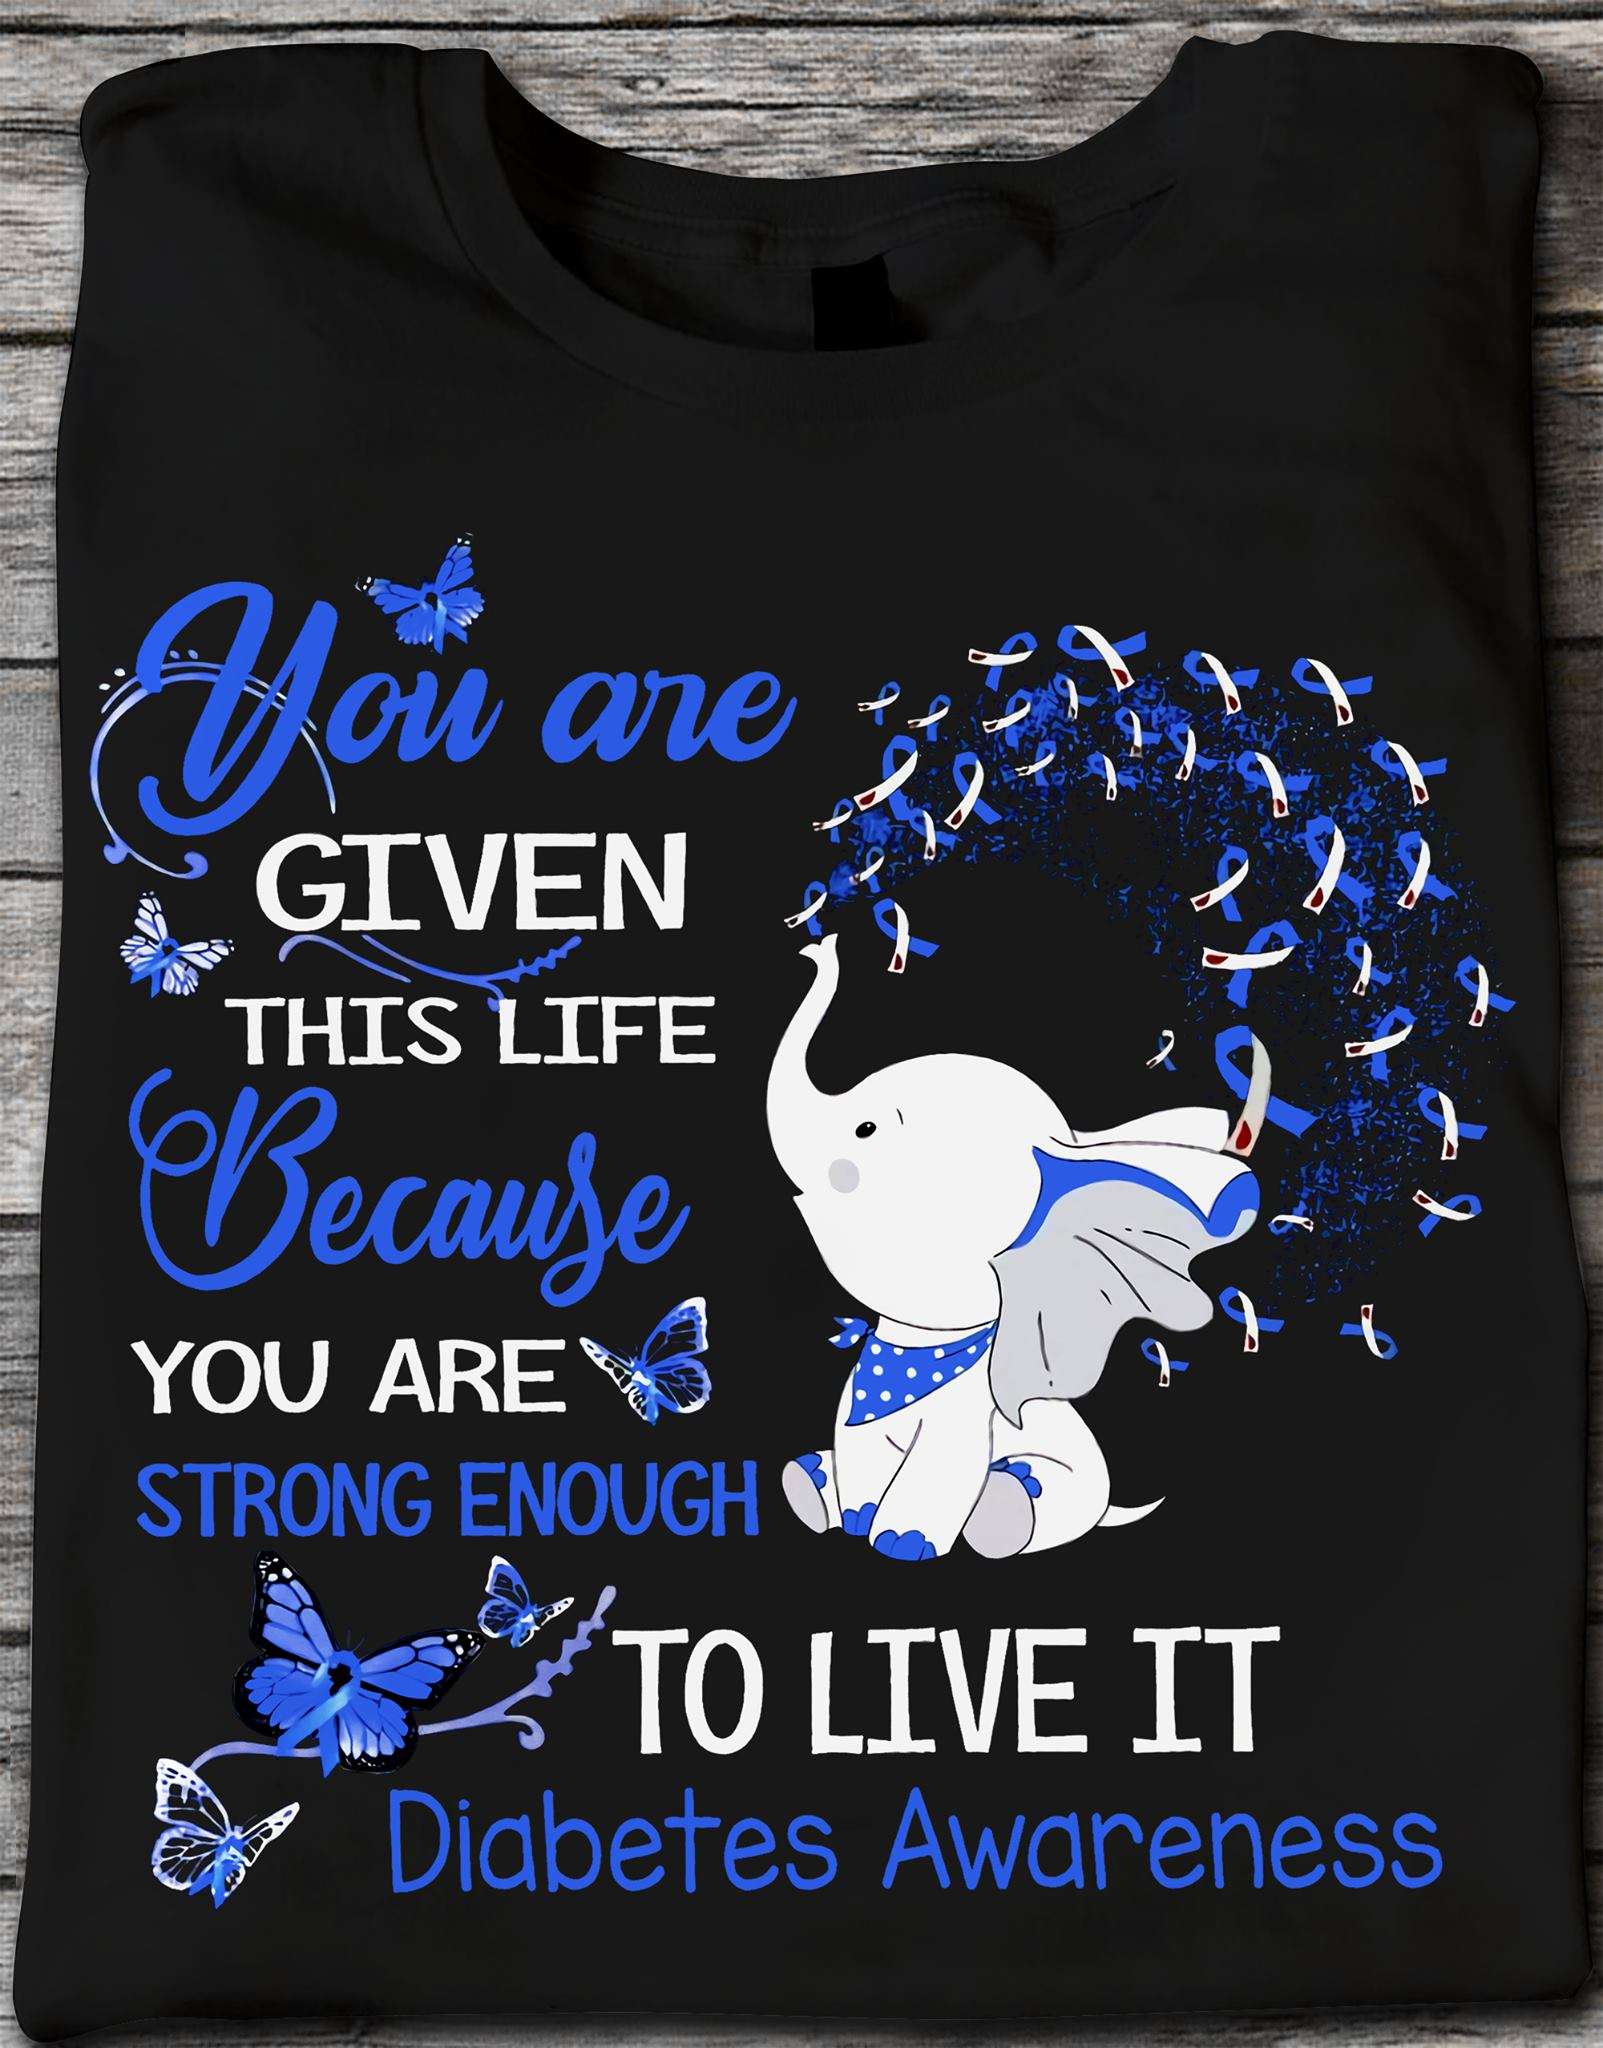 You are given this life because you are strong enough to live it - Diabetes awareness, elephant autism ribbon